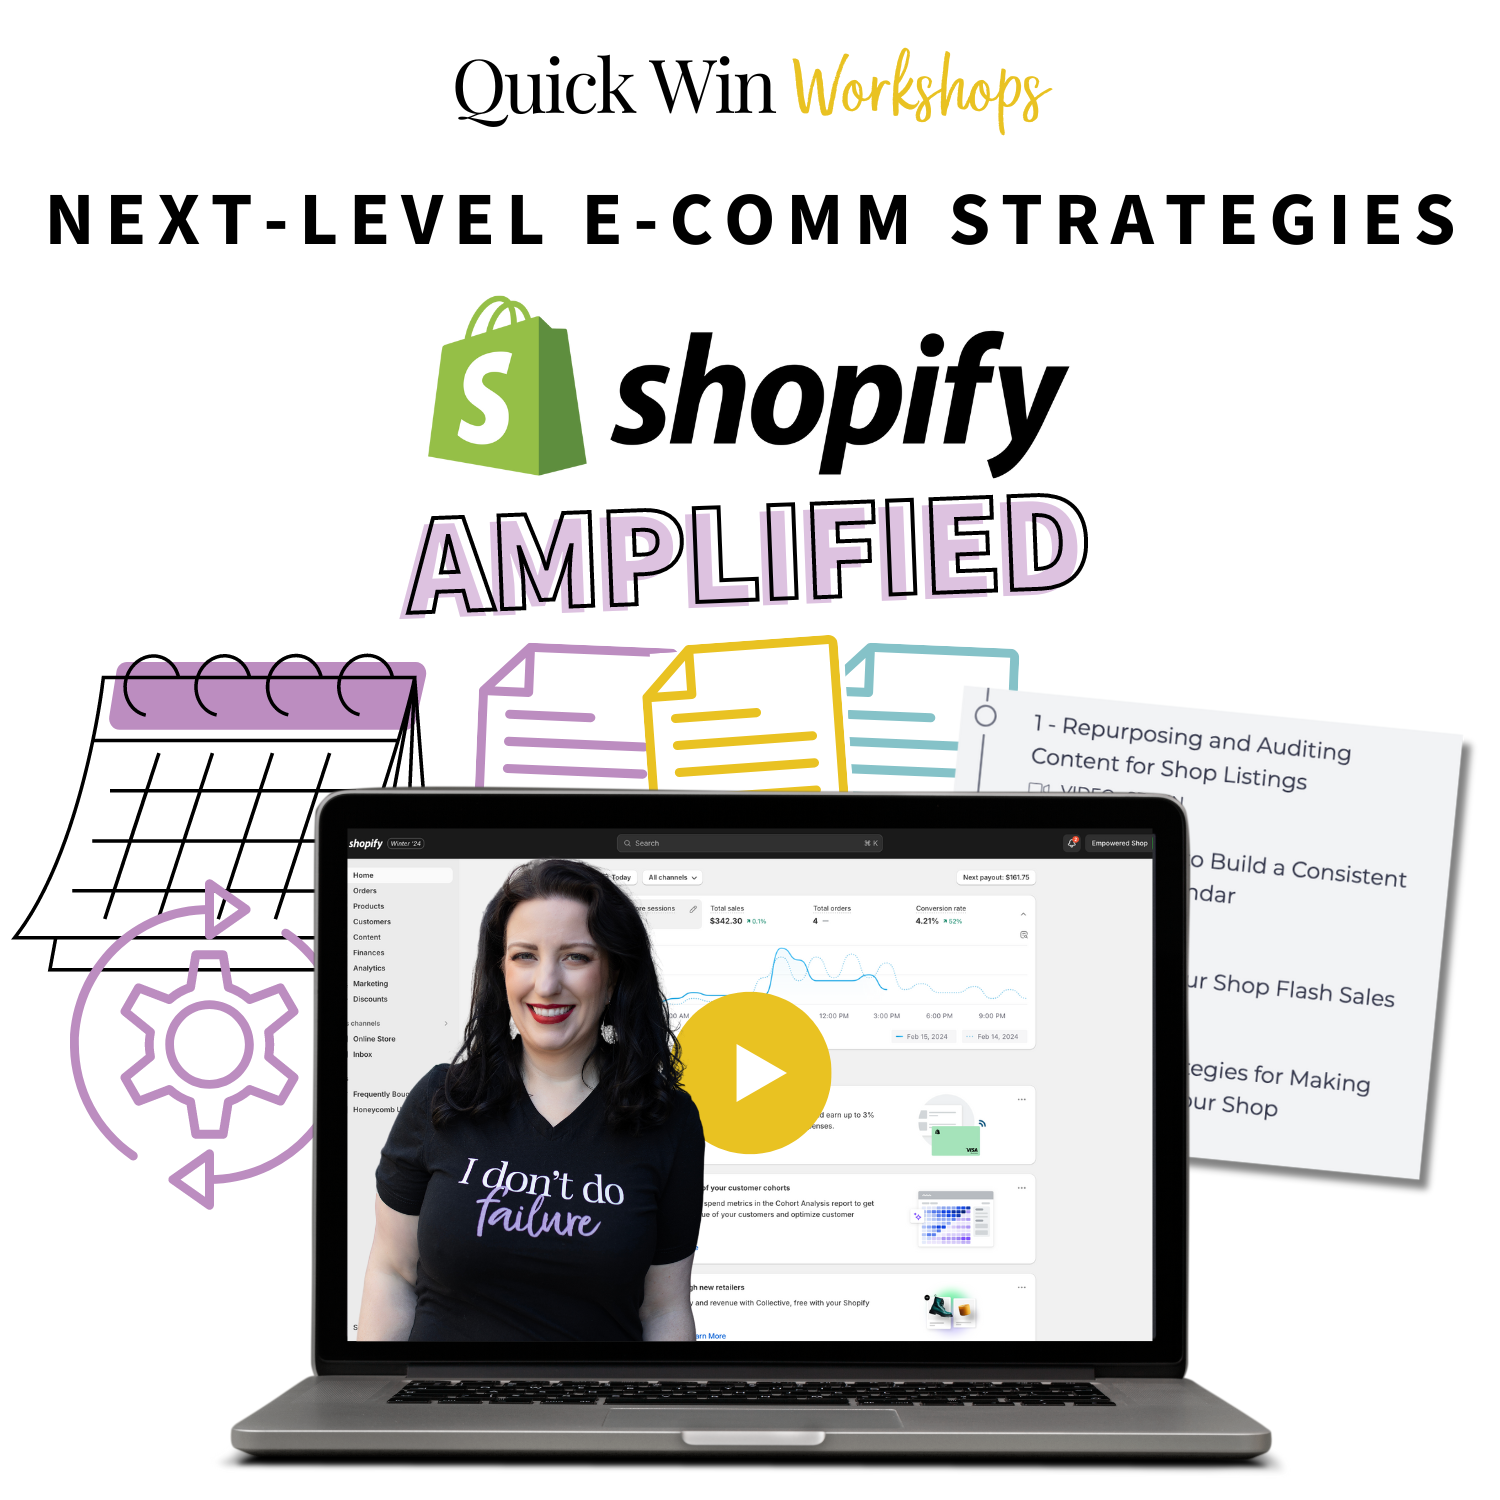 Learn our most powerful strategies for running a digital product e-commerce shop on Shopify in this action-packed workshop